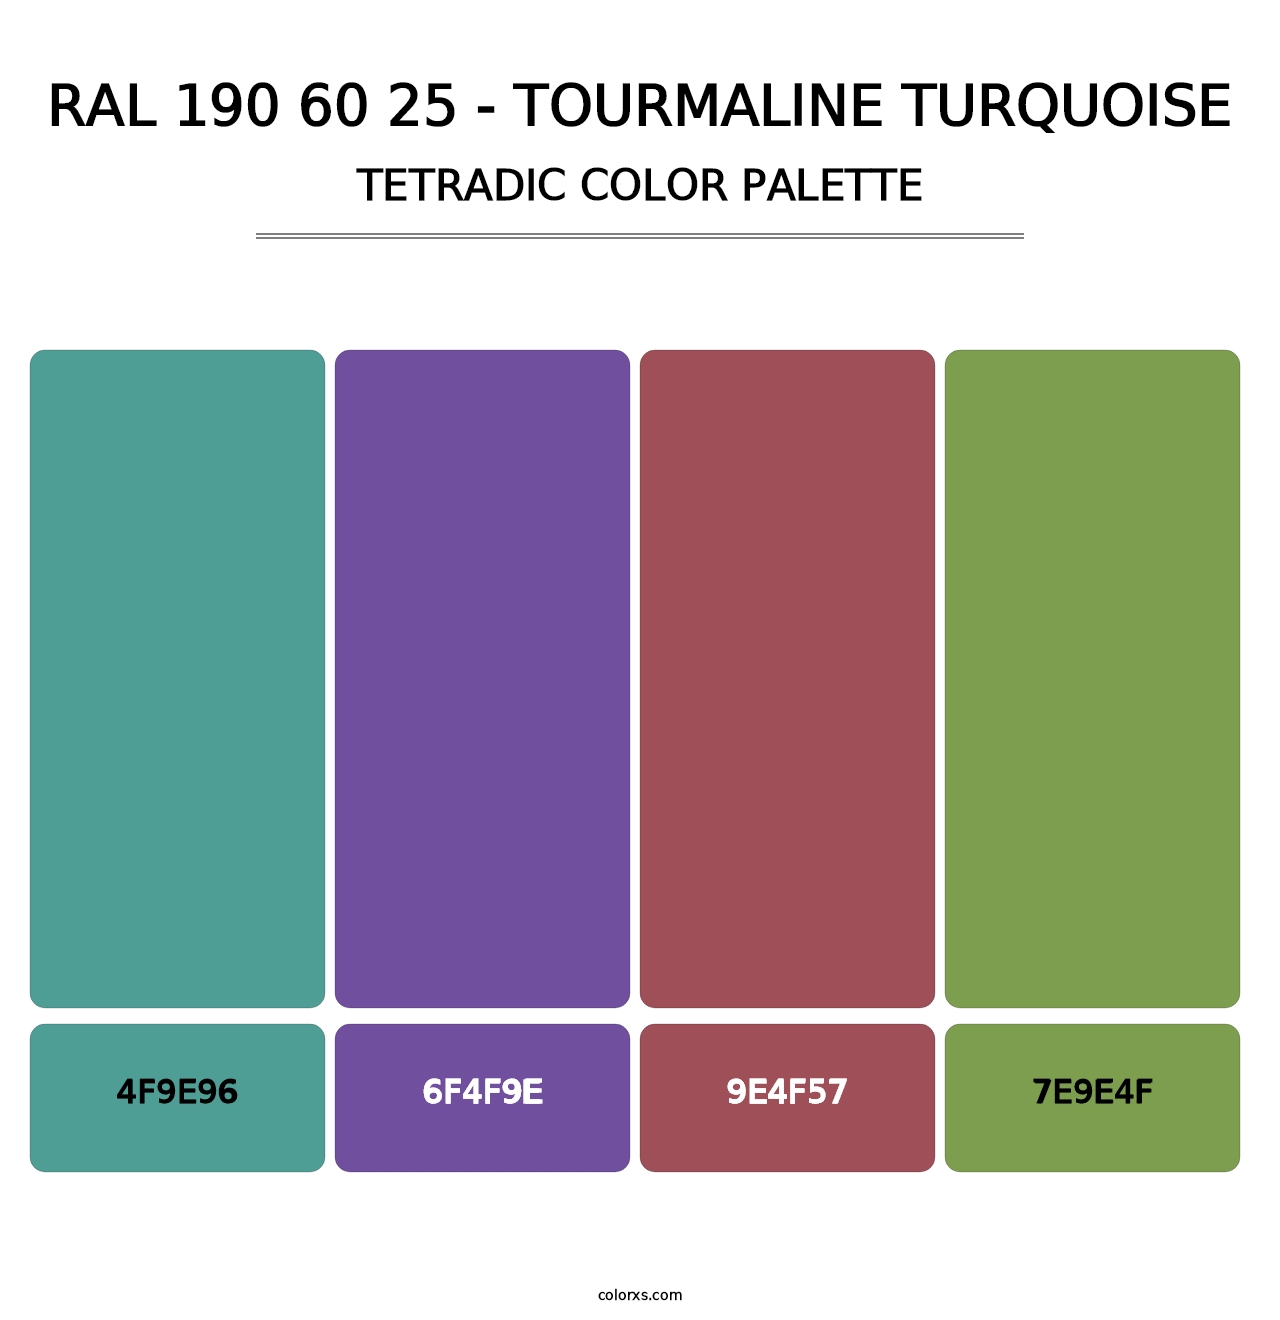 RAL 190 60 25 - Tourmaline Turquoise - Tetradic Color Palette